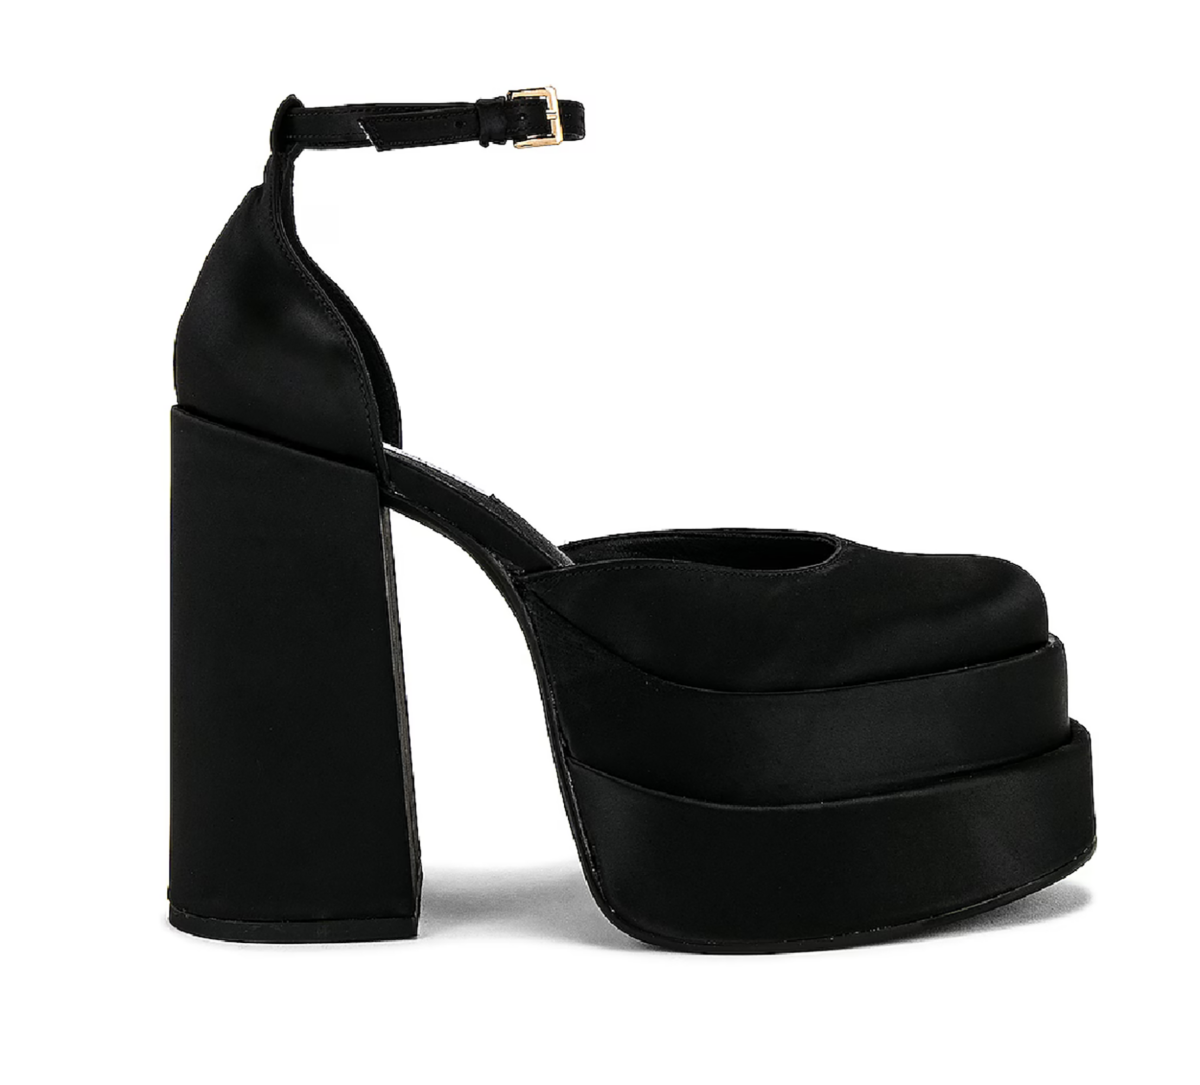 7 Versace dupe heels, by fashion blogger What The Fab